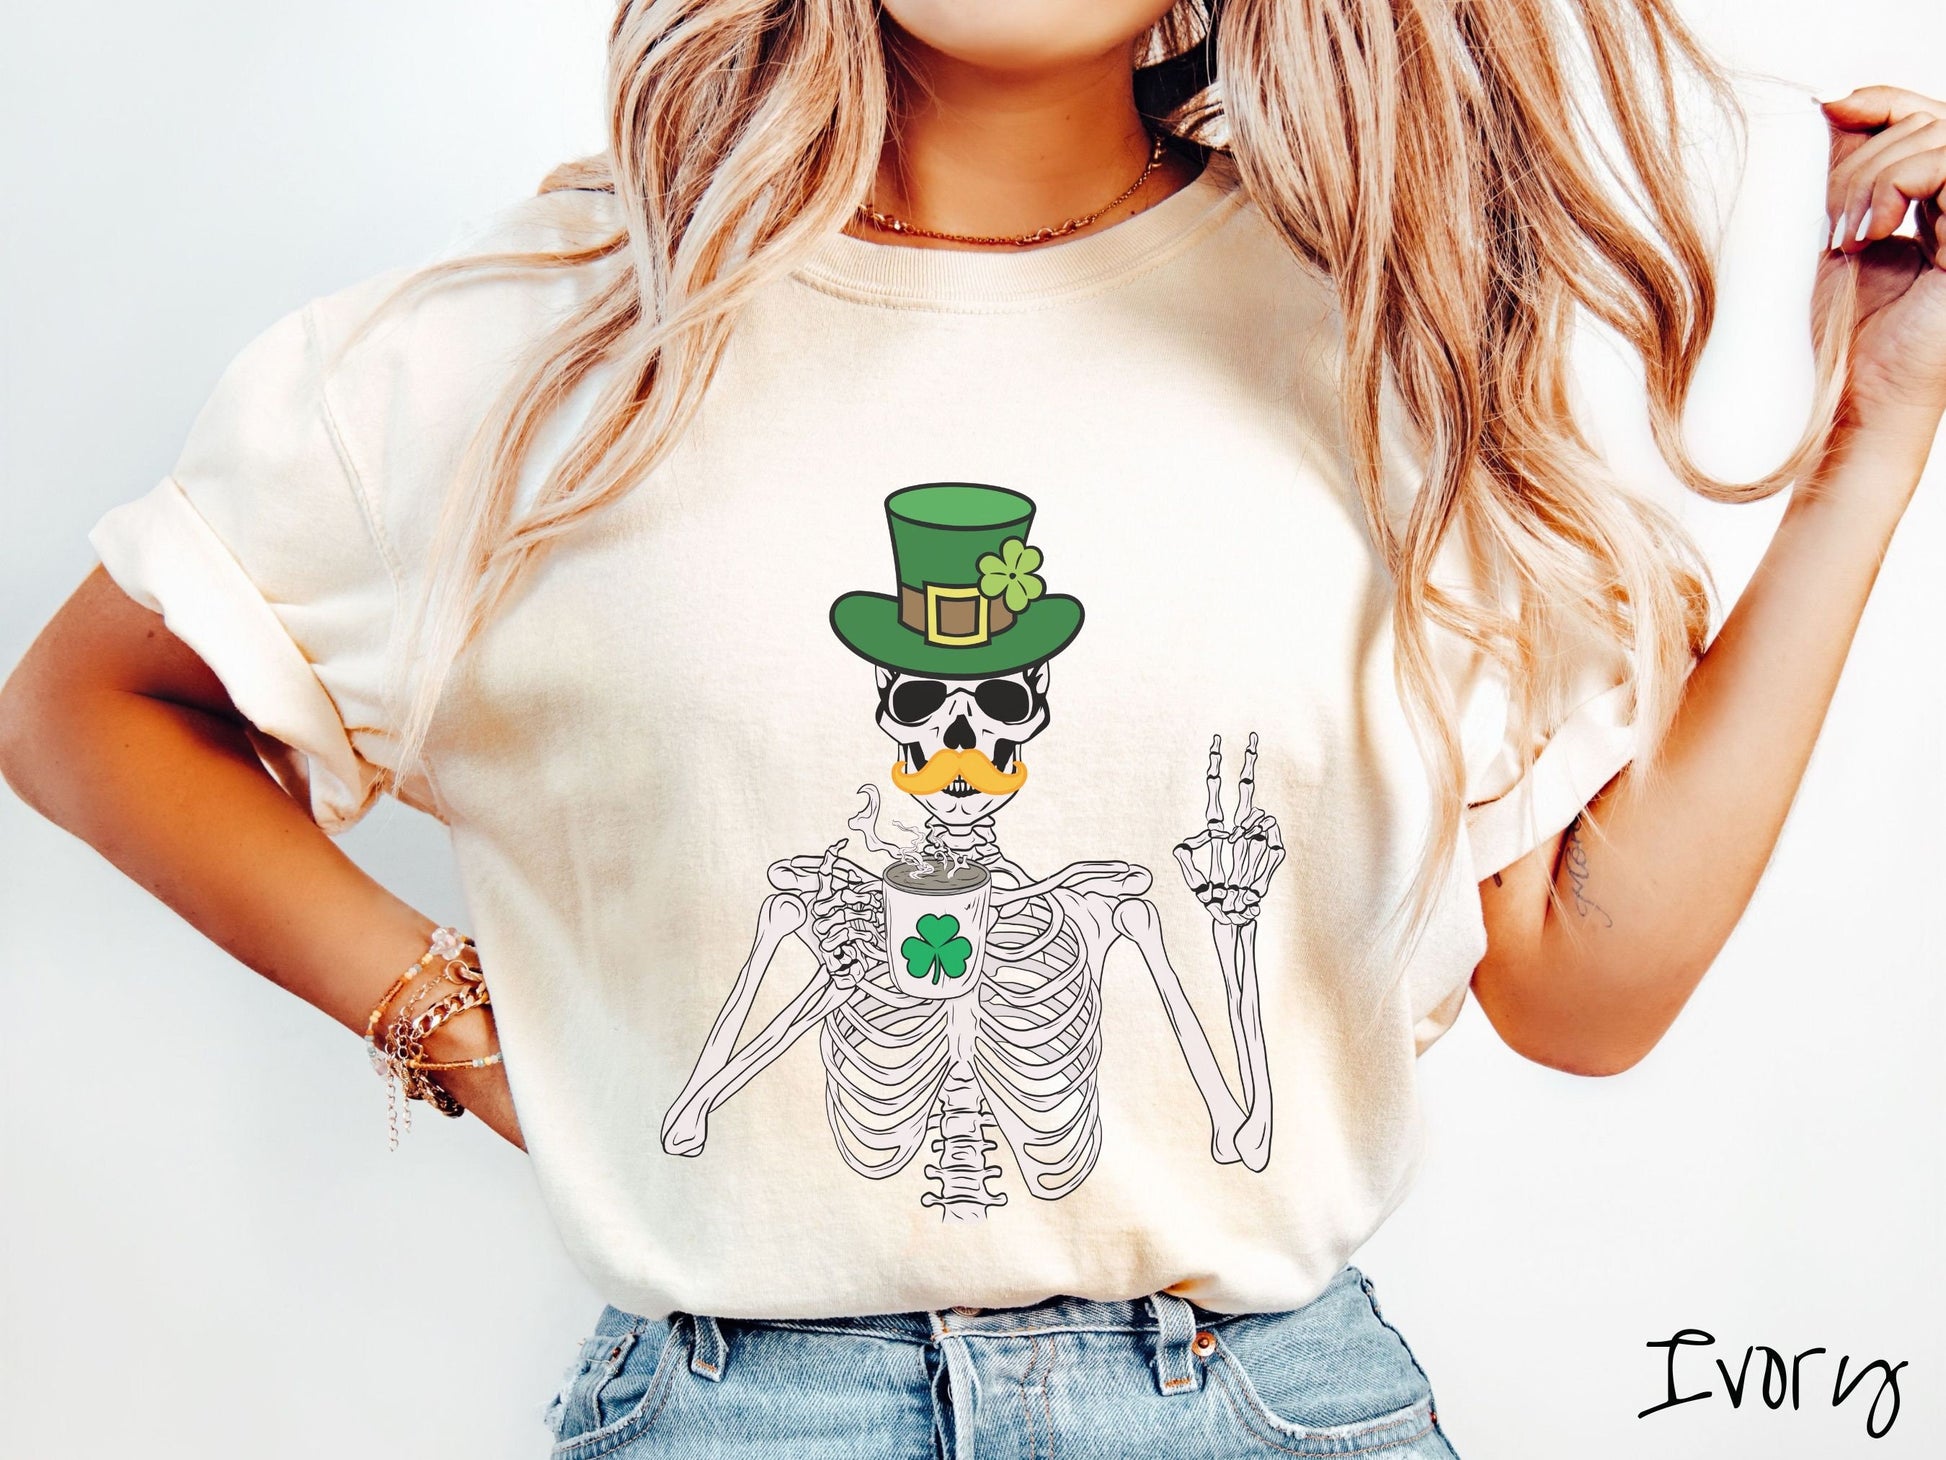 A woman wearing a vintage, ivory colored shirt with a skeleton wearing a green top hat with a green clover and an orange mustache showing the peace sign with its left hand and drinking out of a steaming hot coffee cup with a three leaf clover on it.